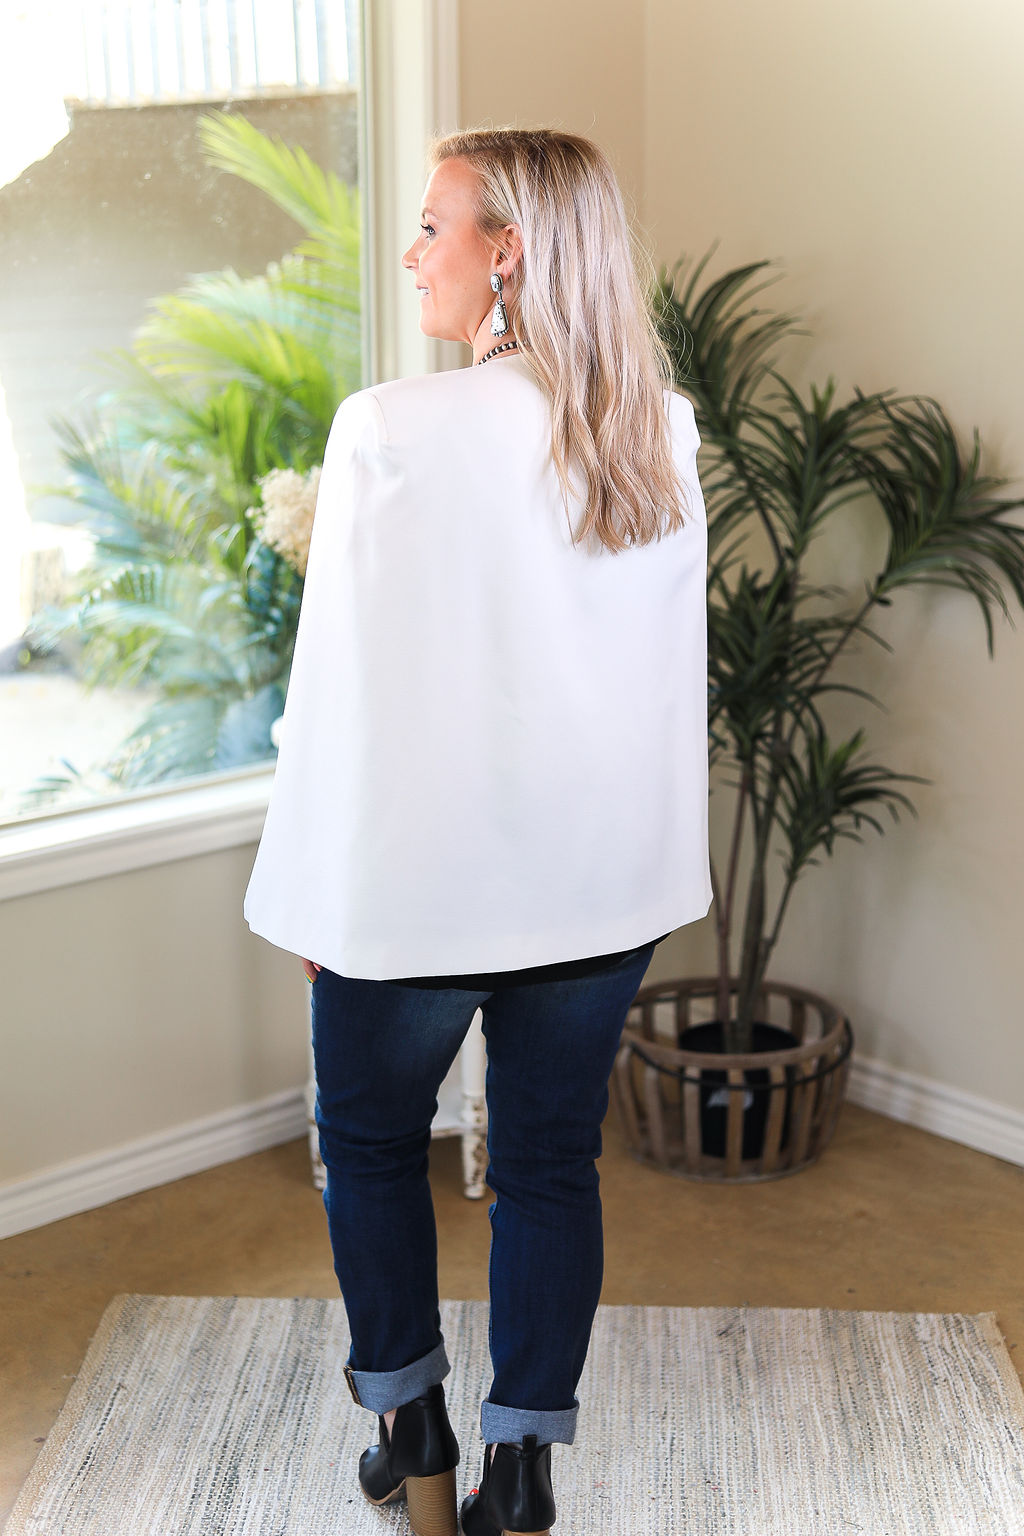 Last Chance Size Medium | Serious Business Cape Blazer in White - Giddy Up Glamour Boutique